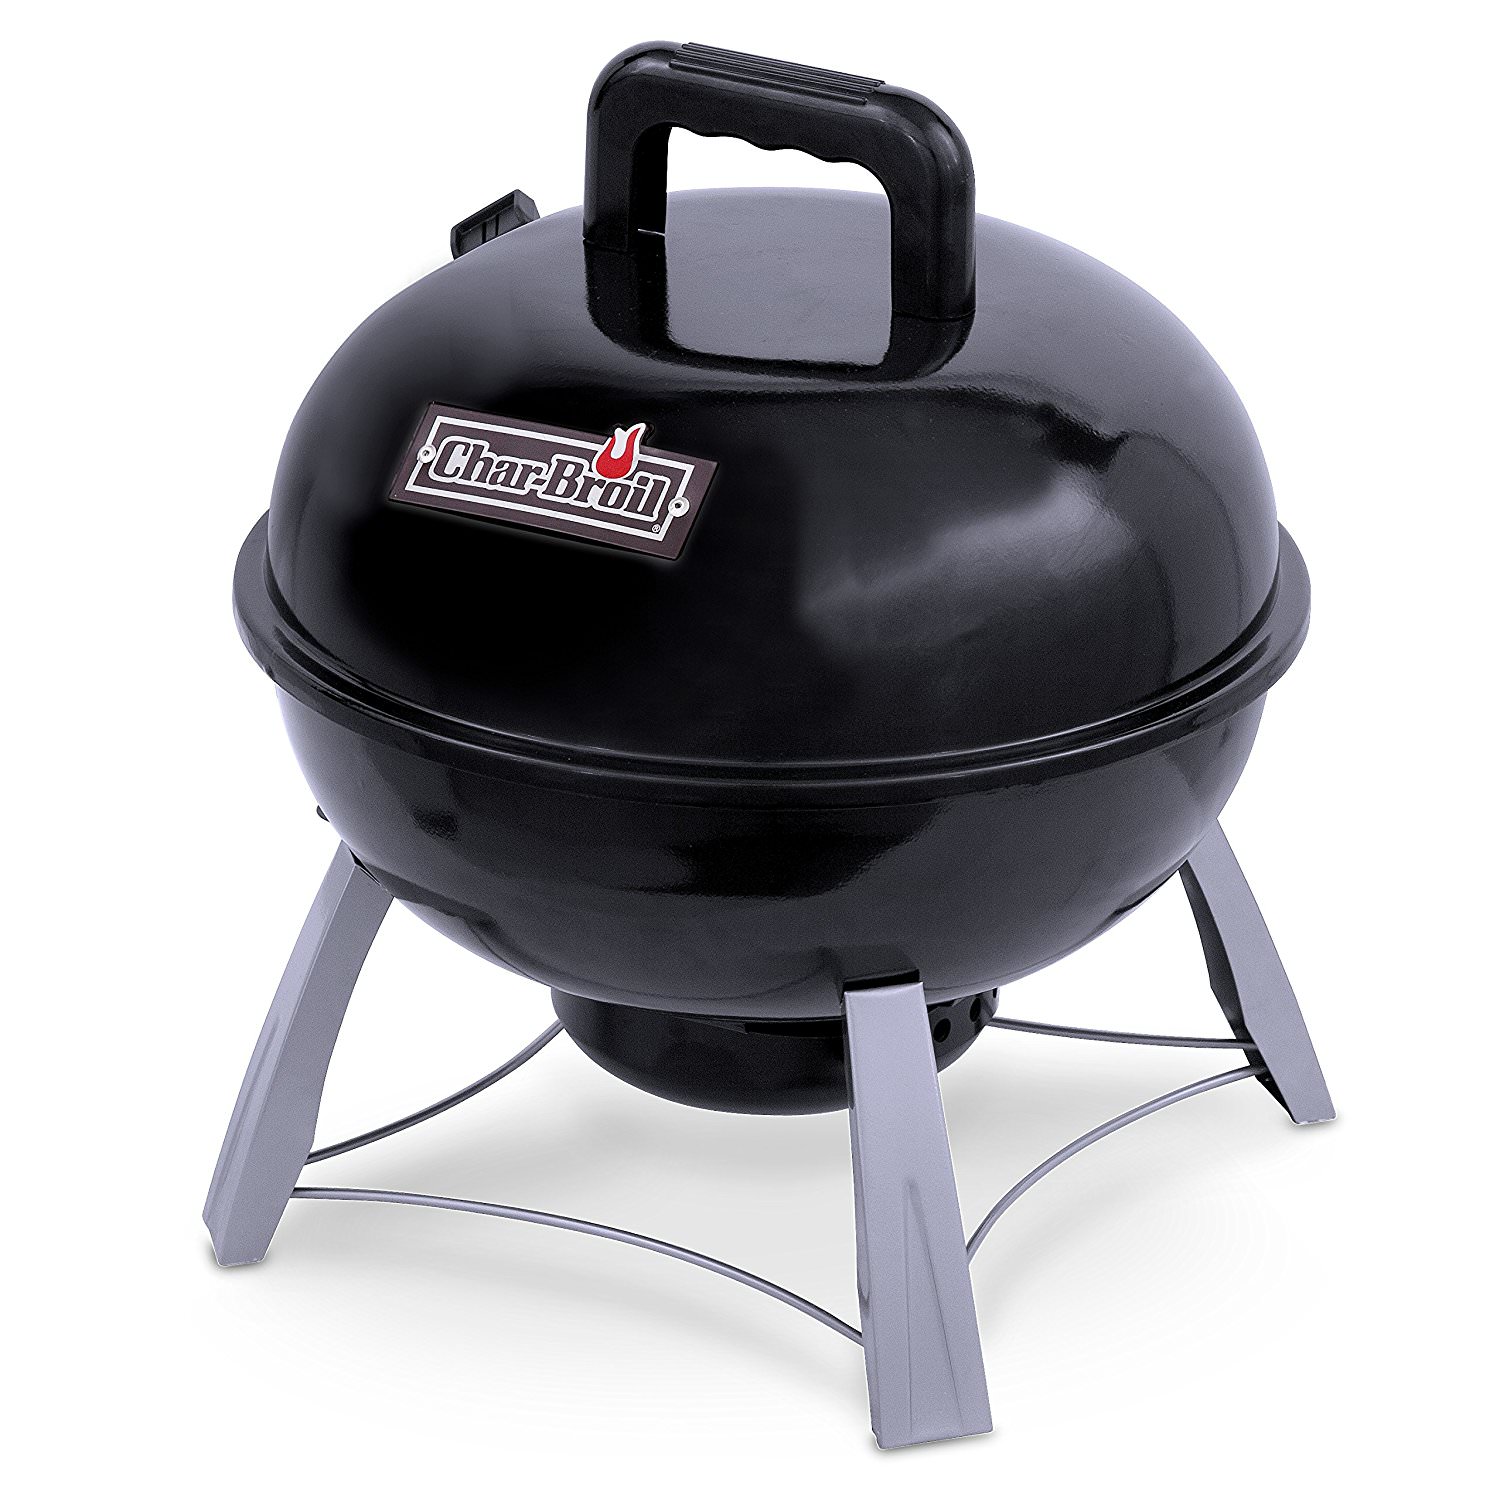 Char-Broil 150 Portable Tabletop Kettle Charcoal Grill - image 4 of 8